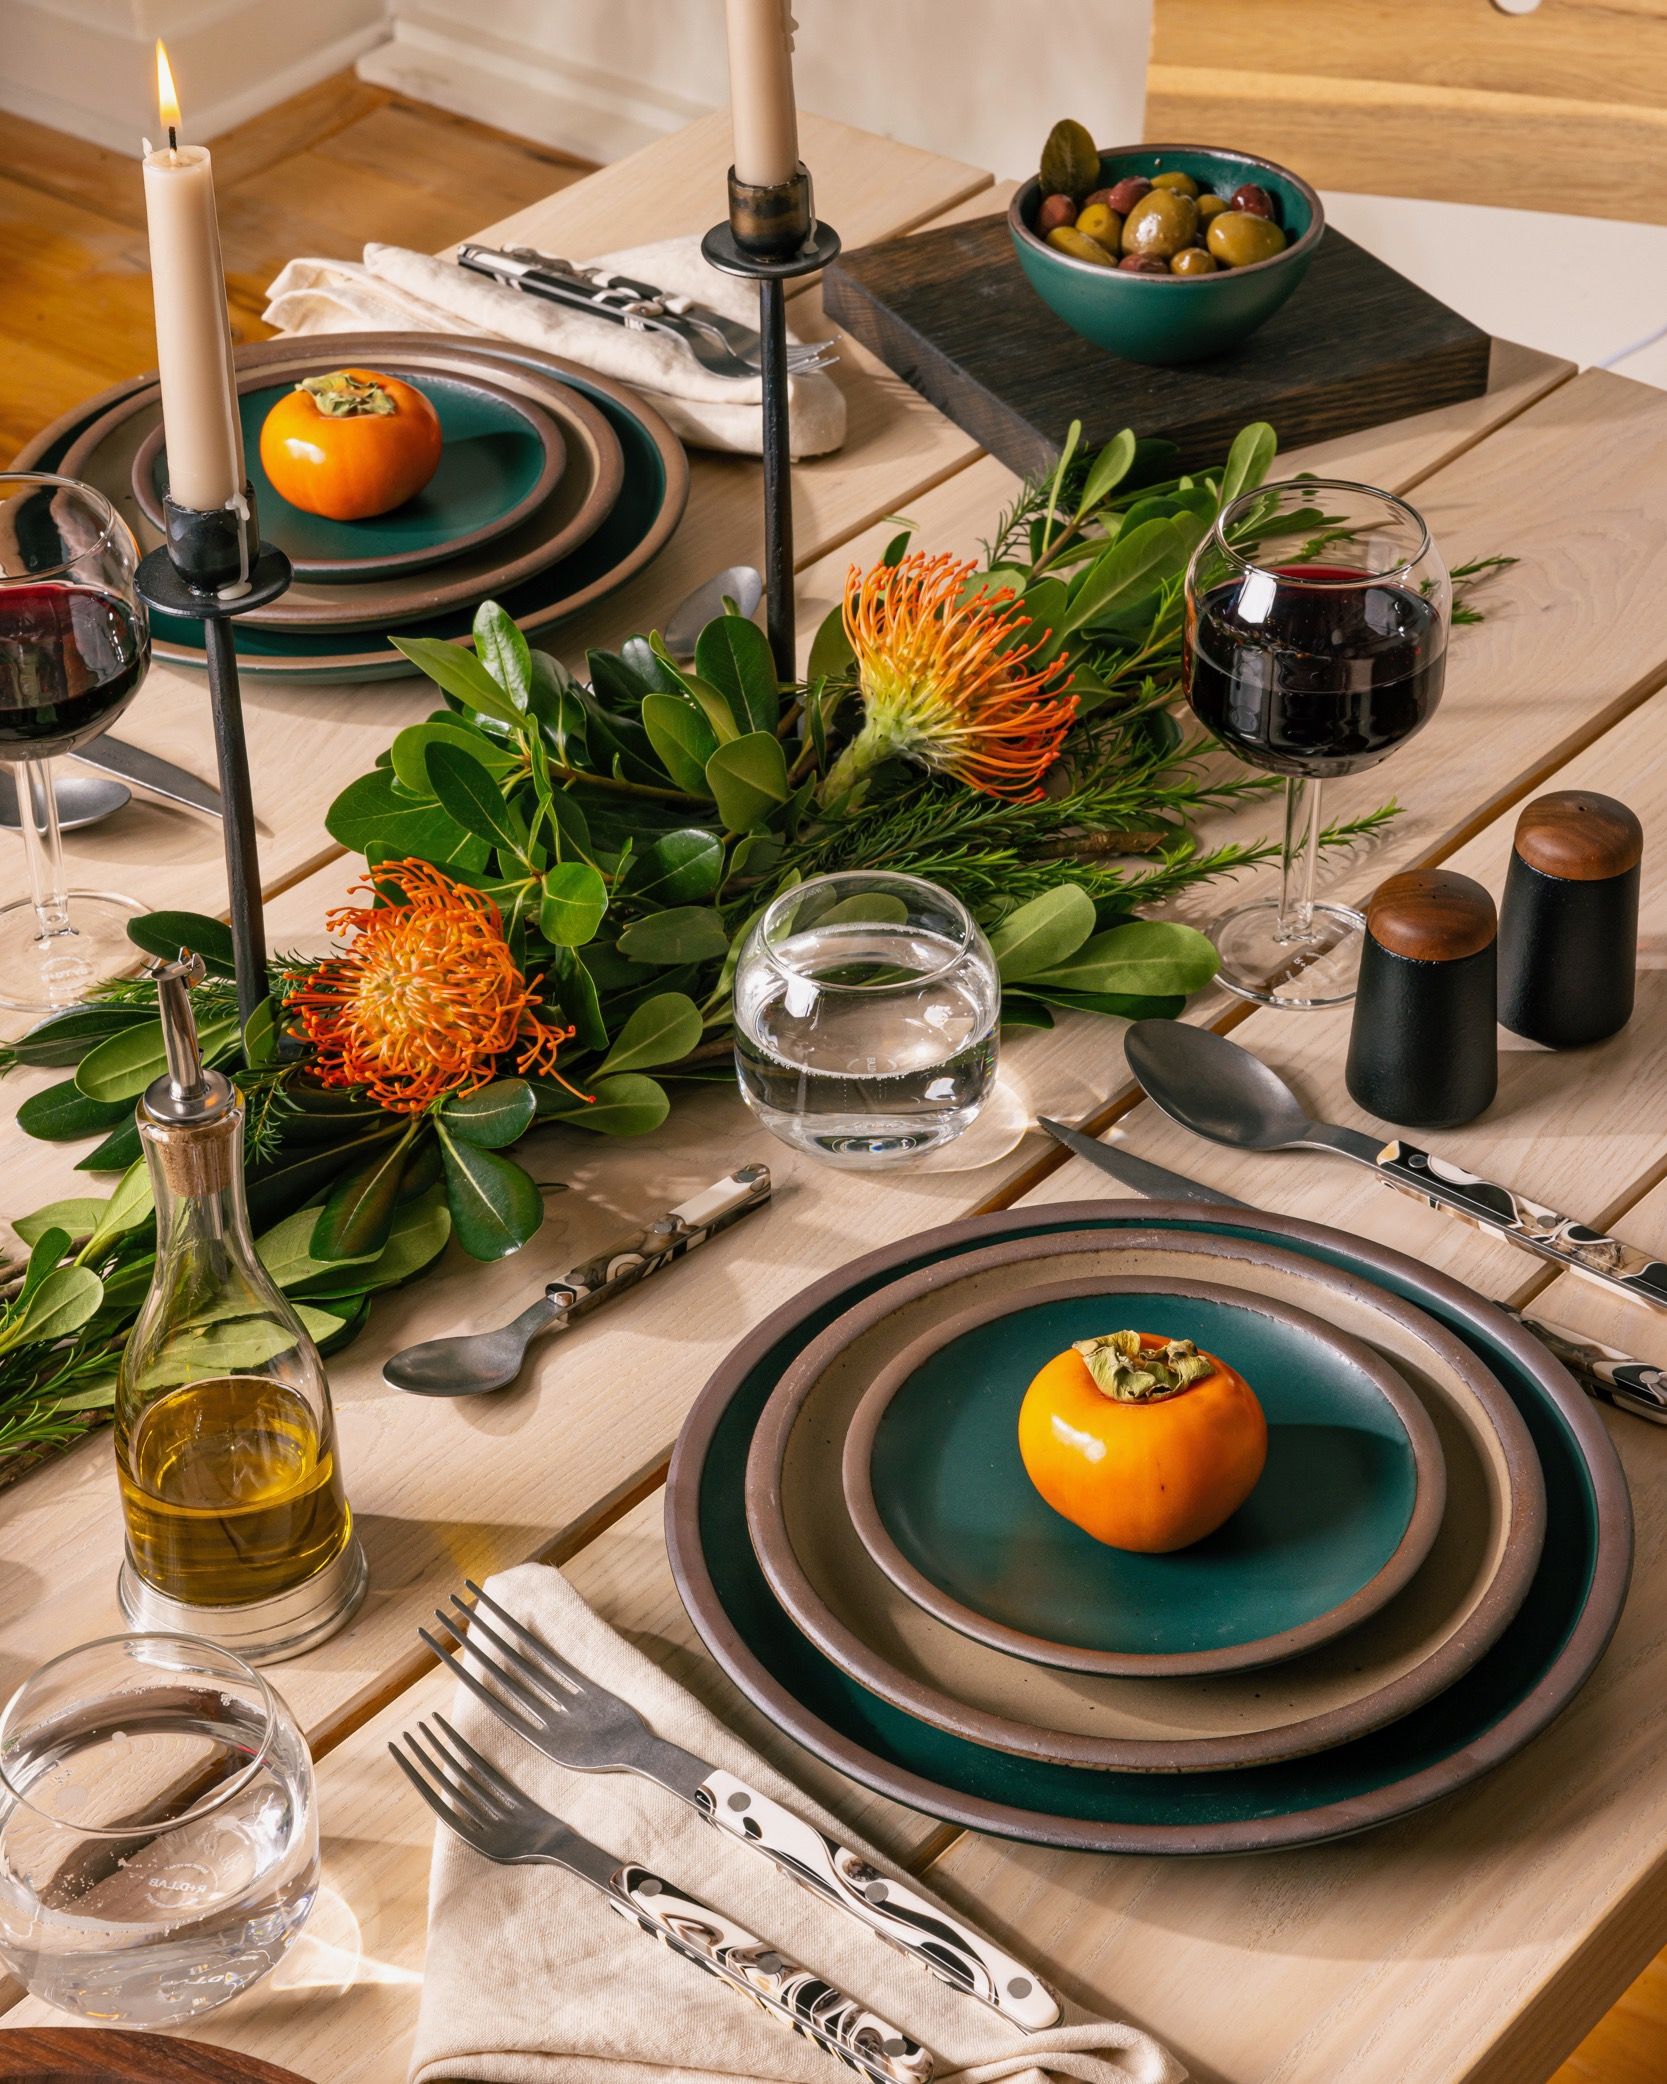 A tablescape featuring ceramic pottery in deep teal and neutral colors, along with a greenery centerpiece, wine glasses, sophisticated flatware, and lit taper candles.